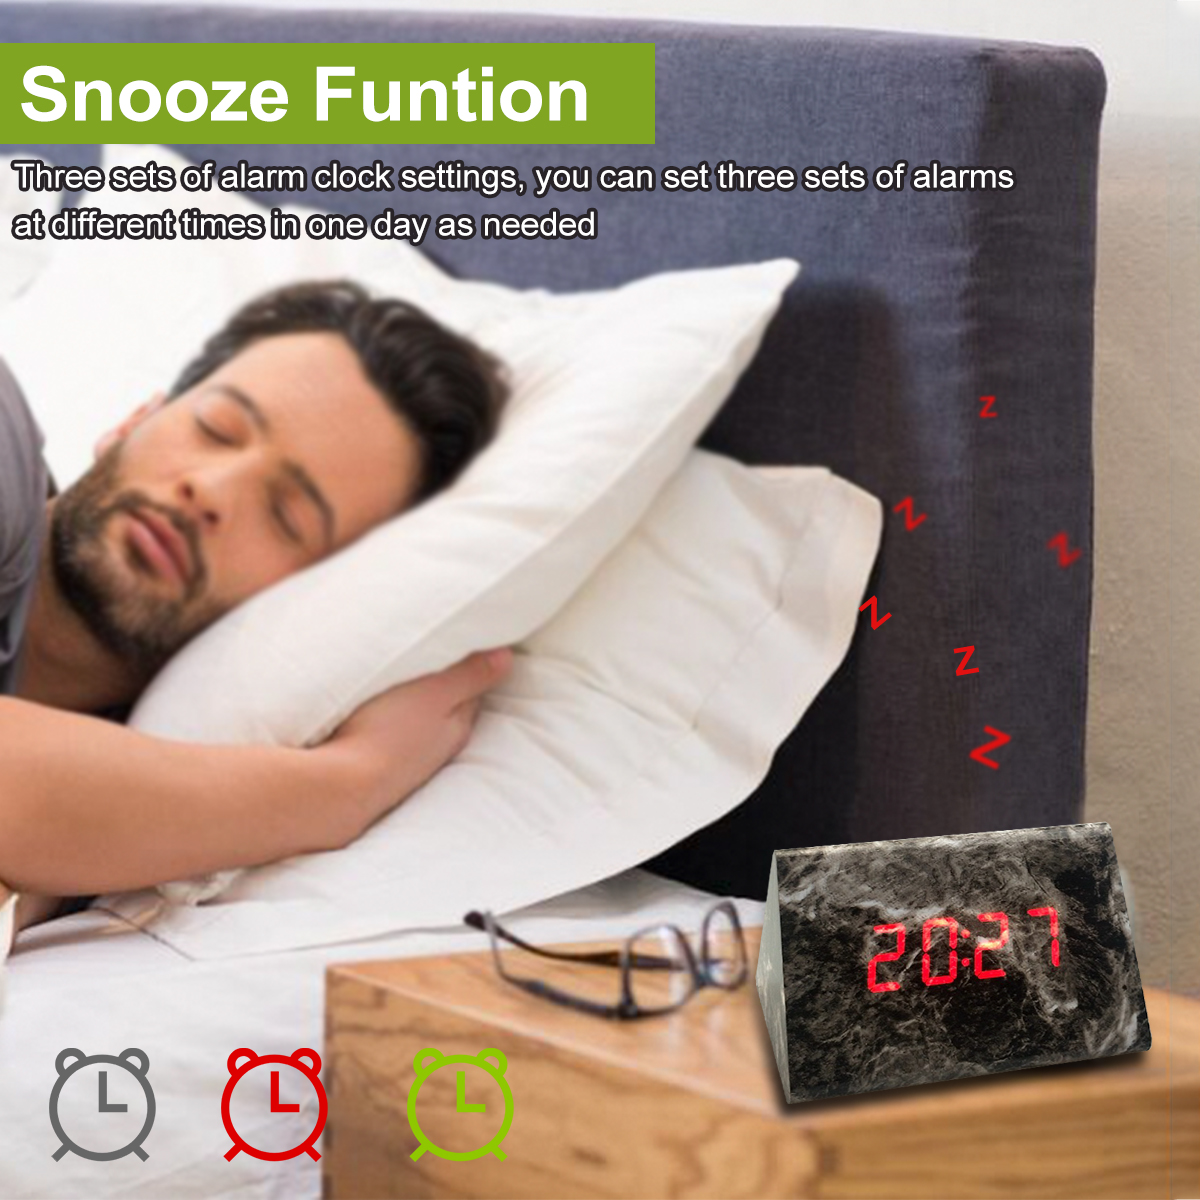 Bakeey-LED-Digital-Display-Alarm-Clock-Voice-Control-Table-Snooze-Clocks-For-Bedrooms-1813854-2